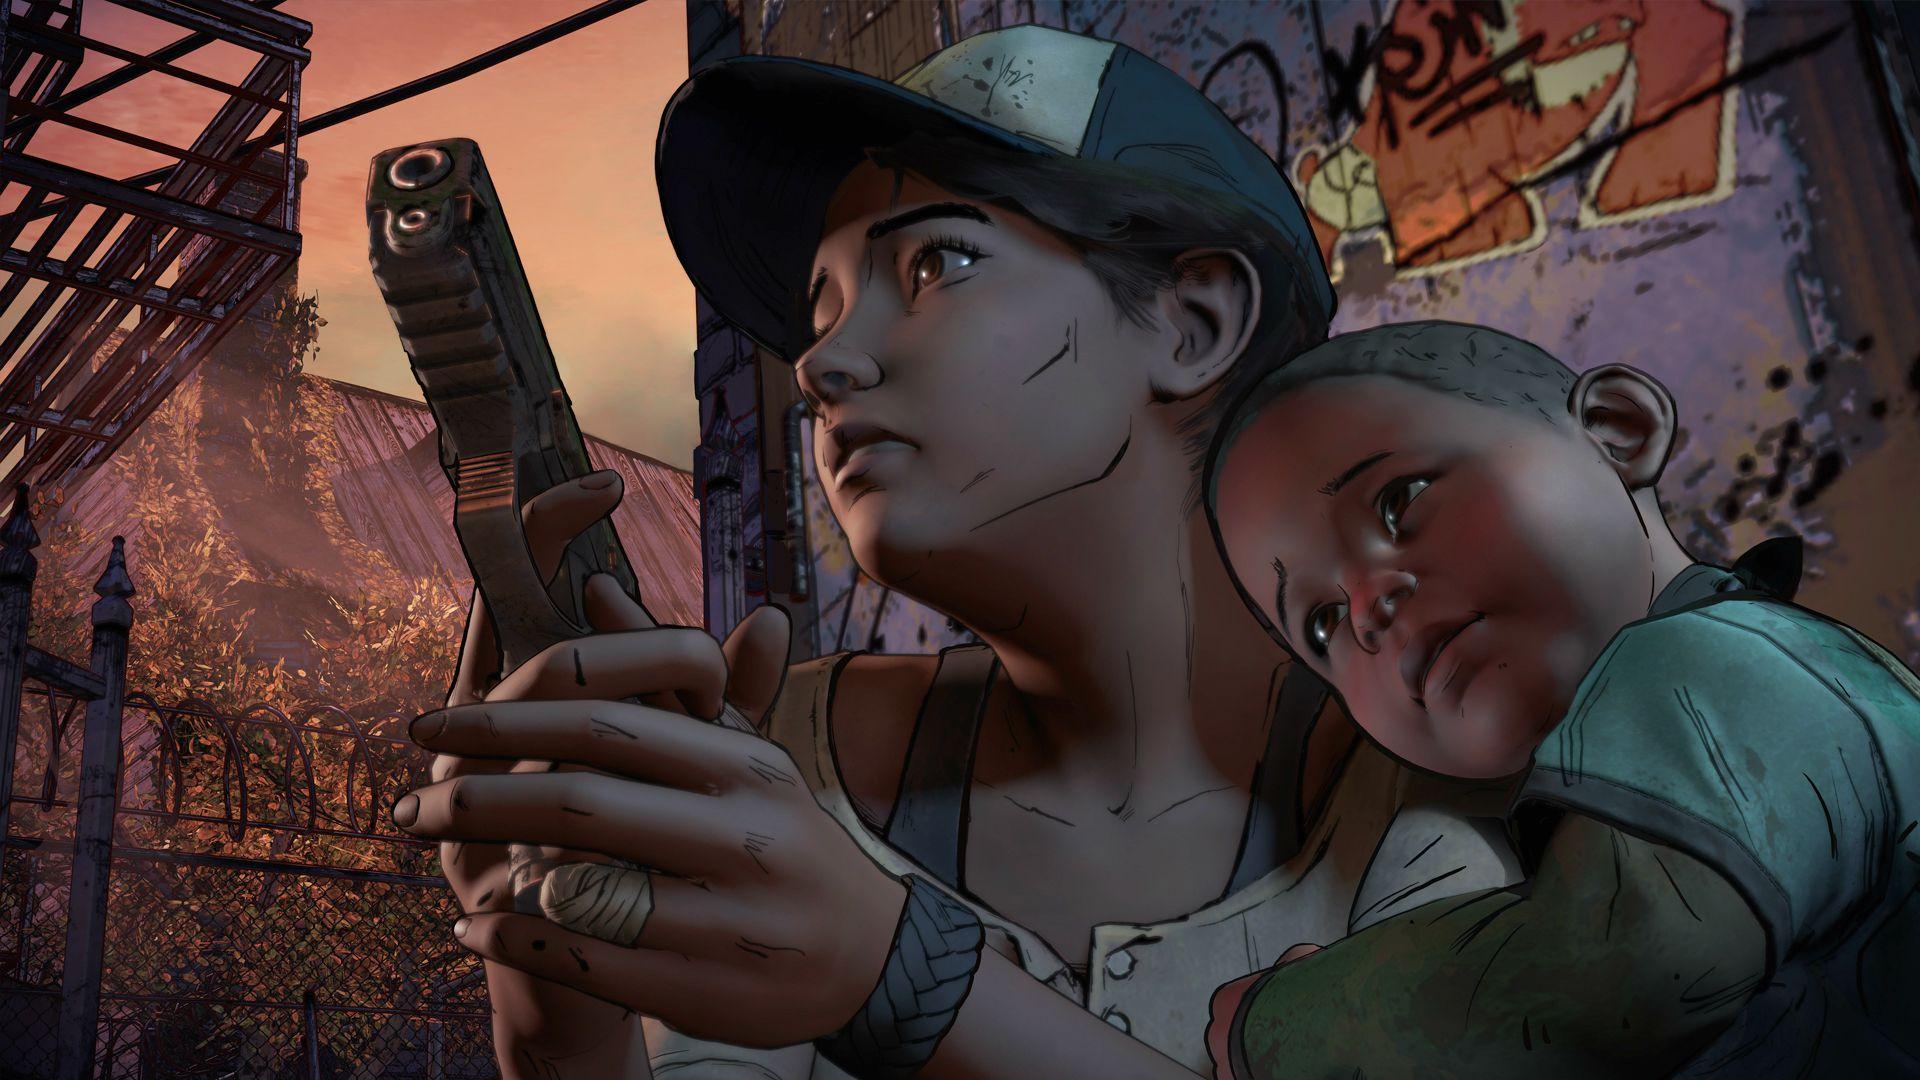 The Walking Dead's Clementine from the Telltale games might be